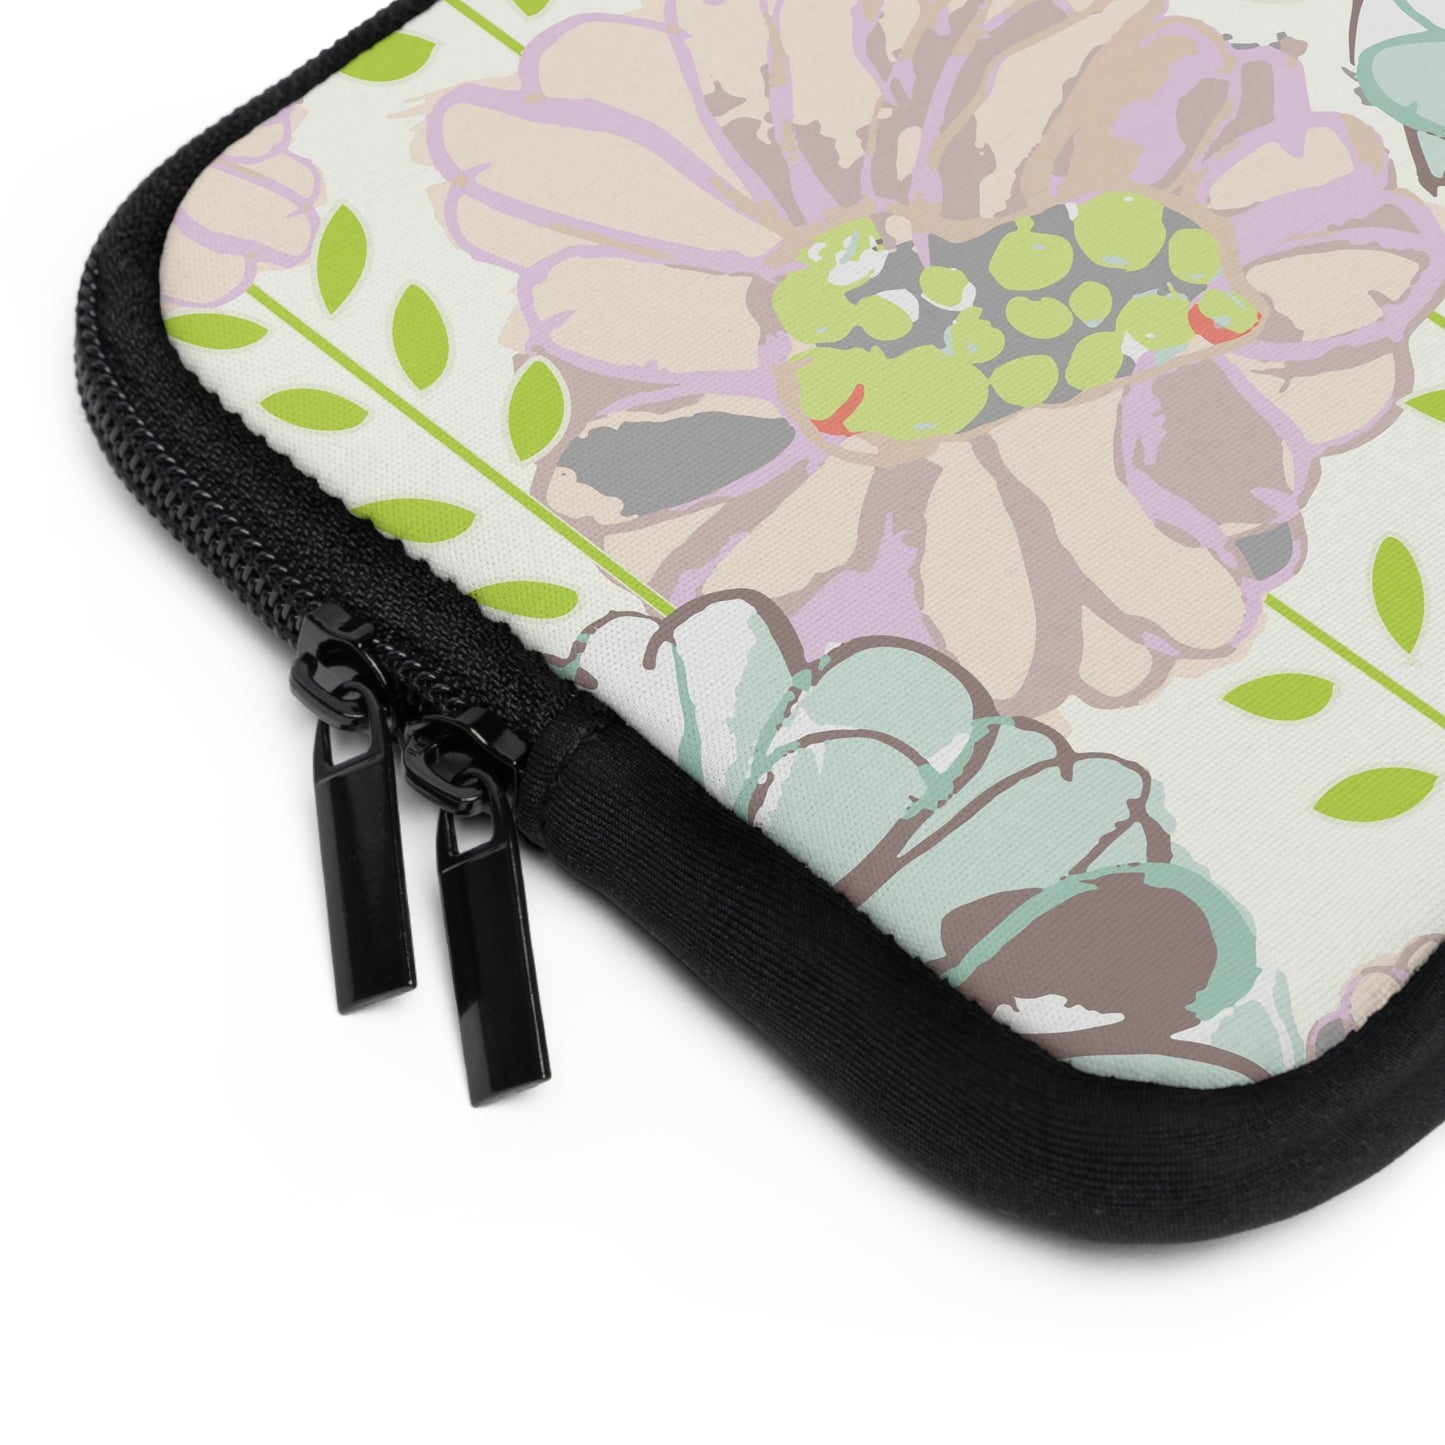 Soft Watercolor Floral Laptop Sleeve